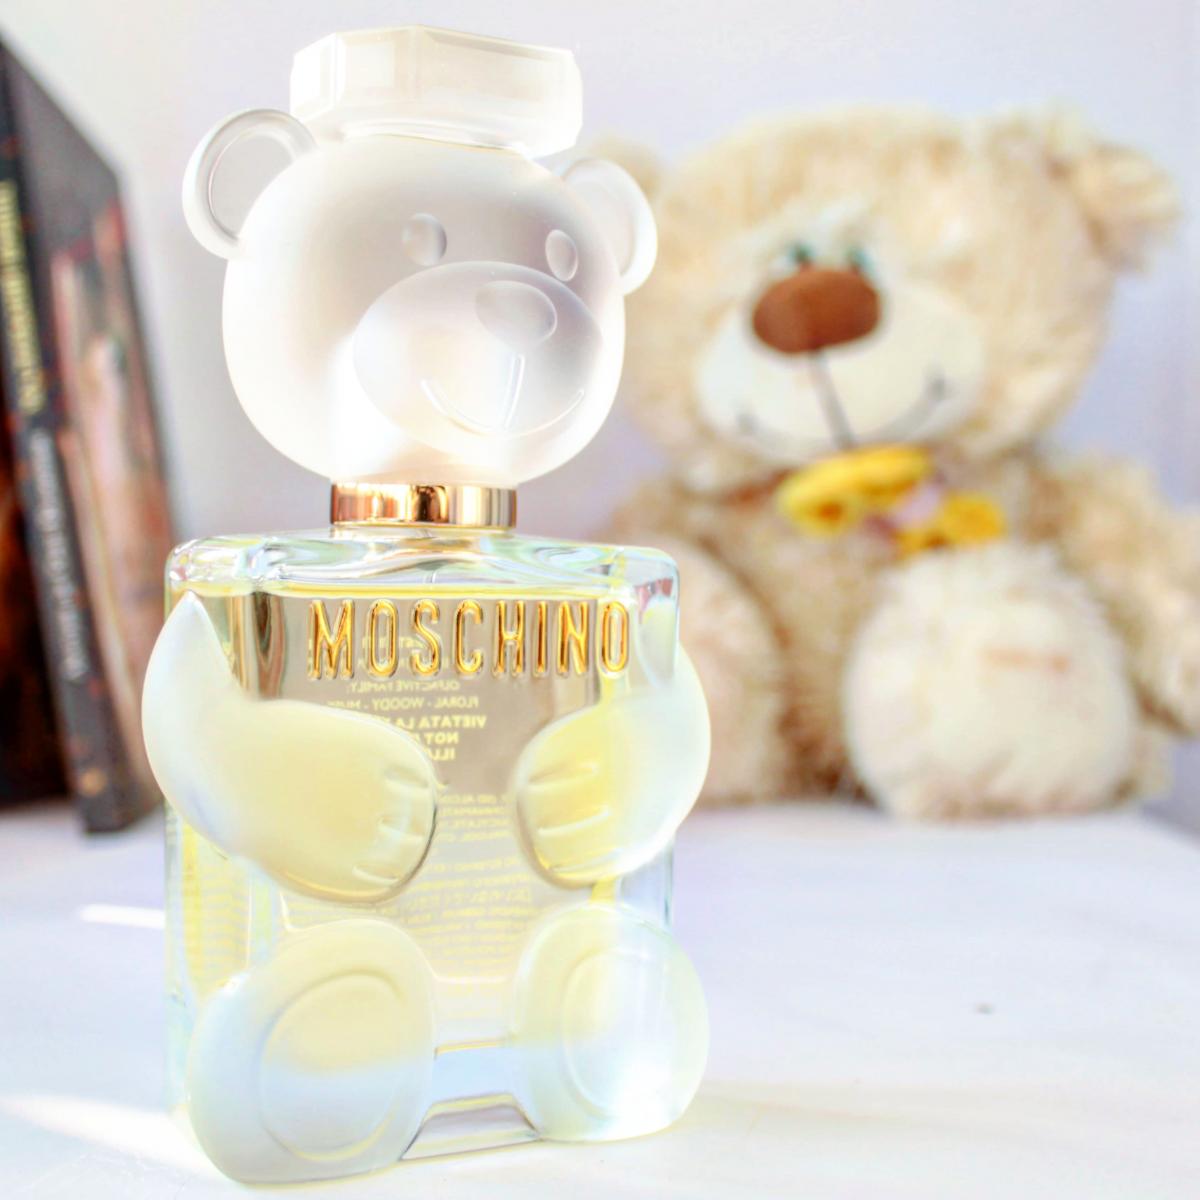 Toy 2 Moschino perfume - a new fragrance for women 2018